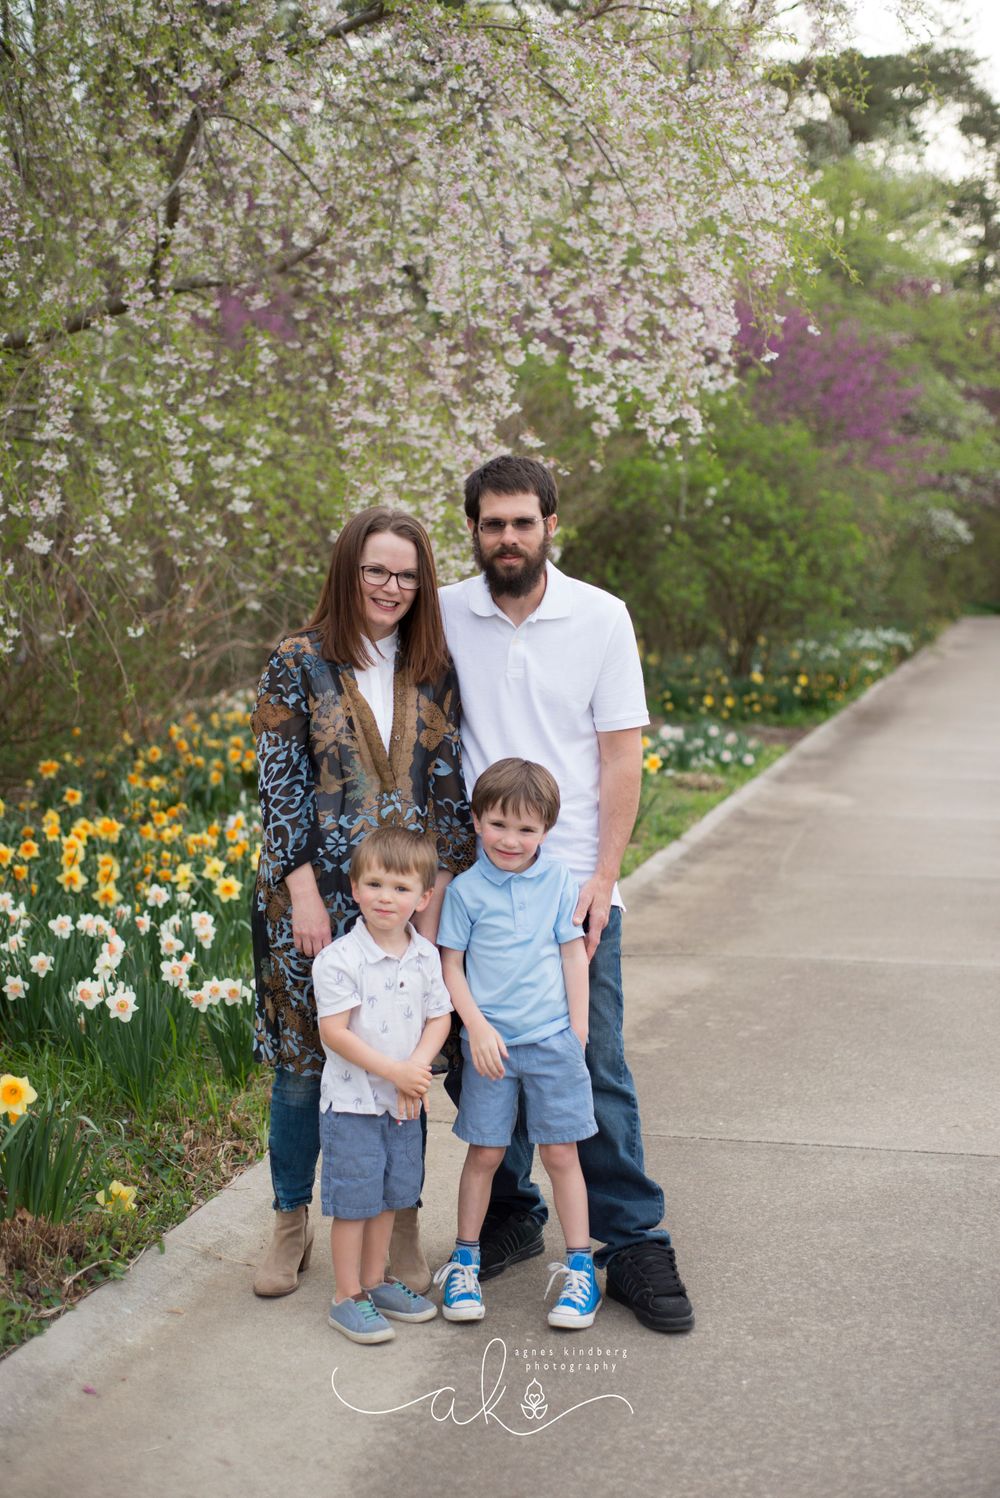 A family of four posing for a photo on a pathway surrounded by spring blooms.